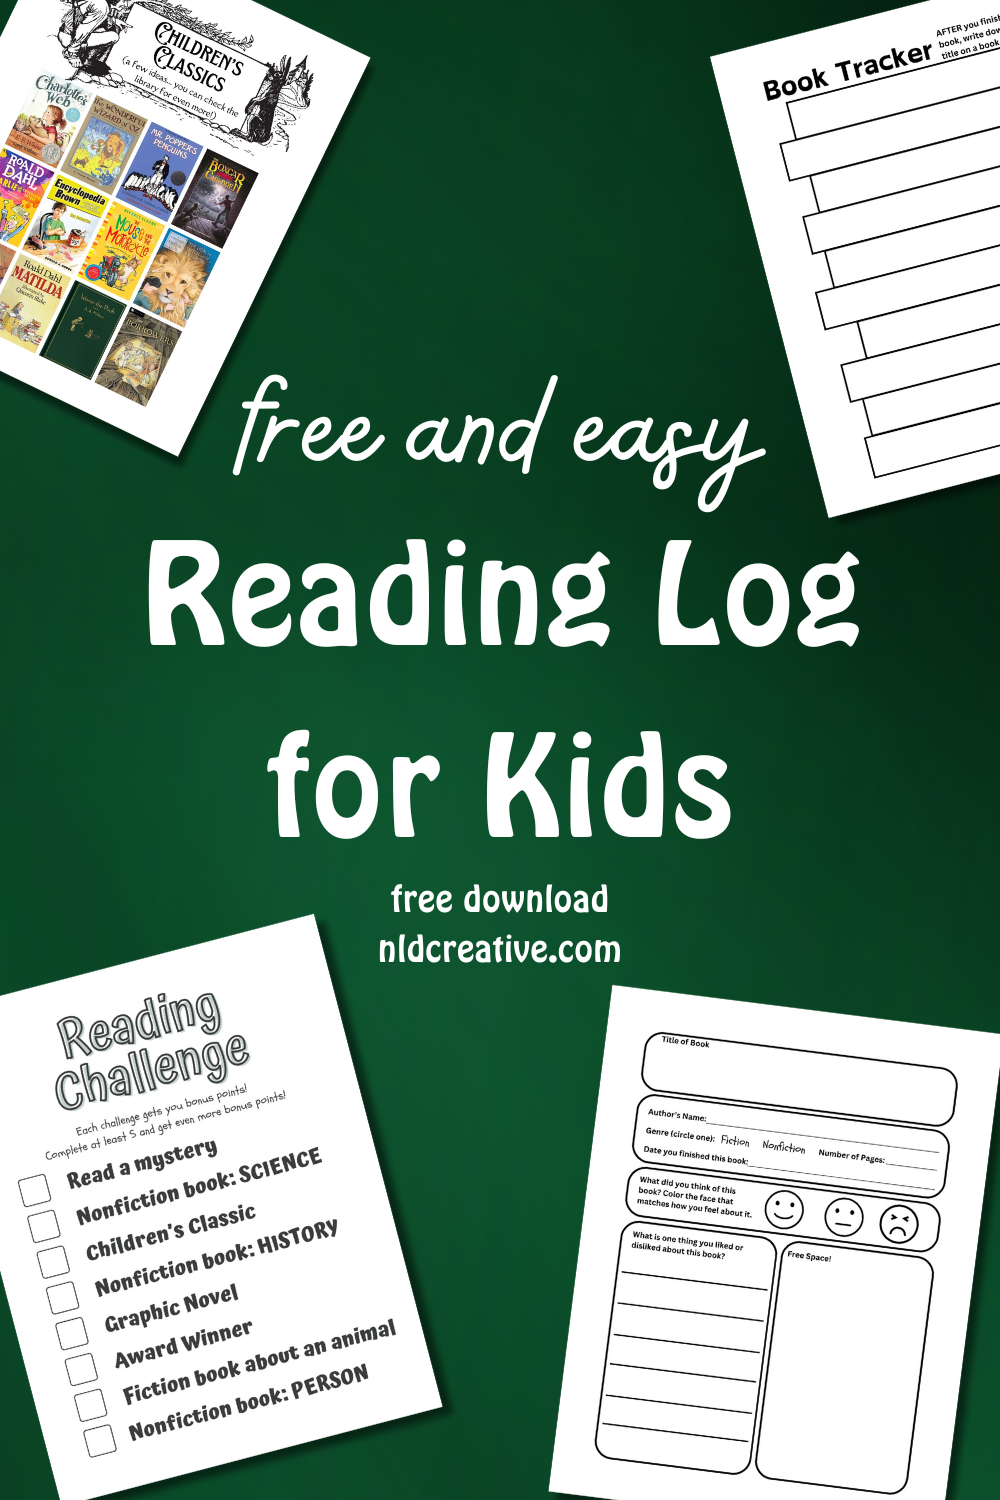 featured image showing previews of the free reading log for kids